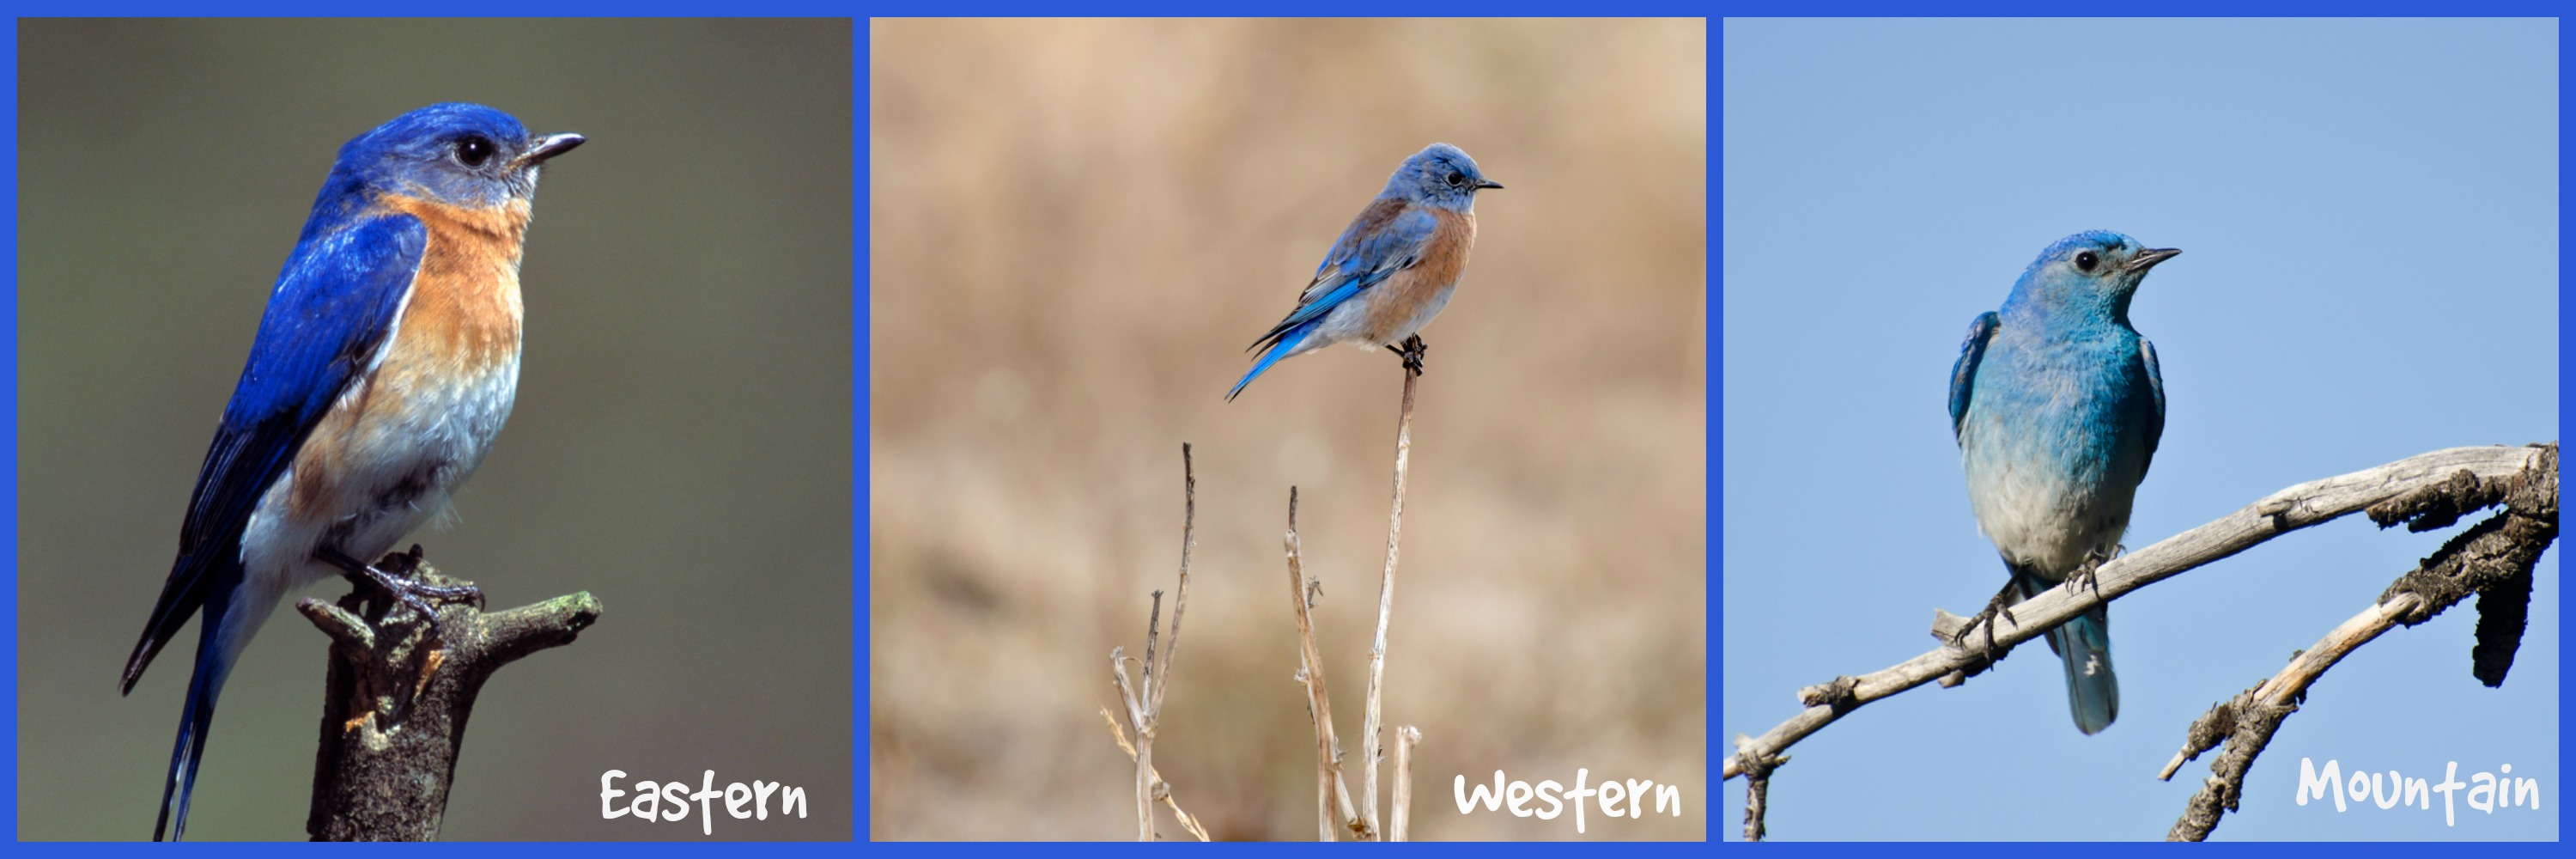 How to attract bluebirds to your yard, Eastern bluebird, Western Bluebird, Mountain bluebird